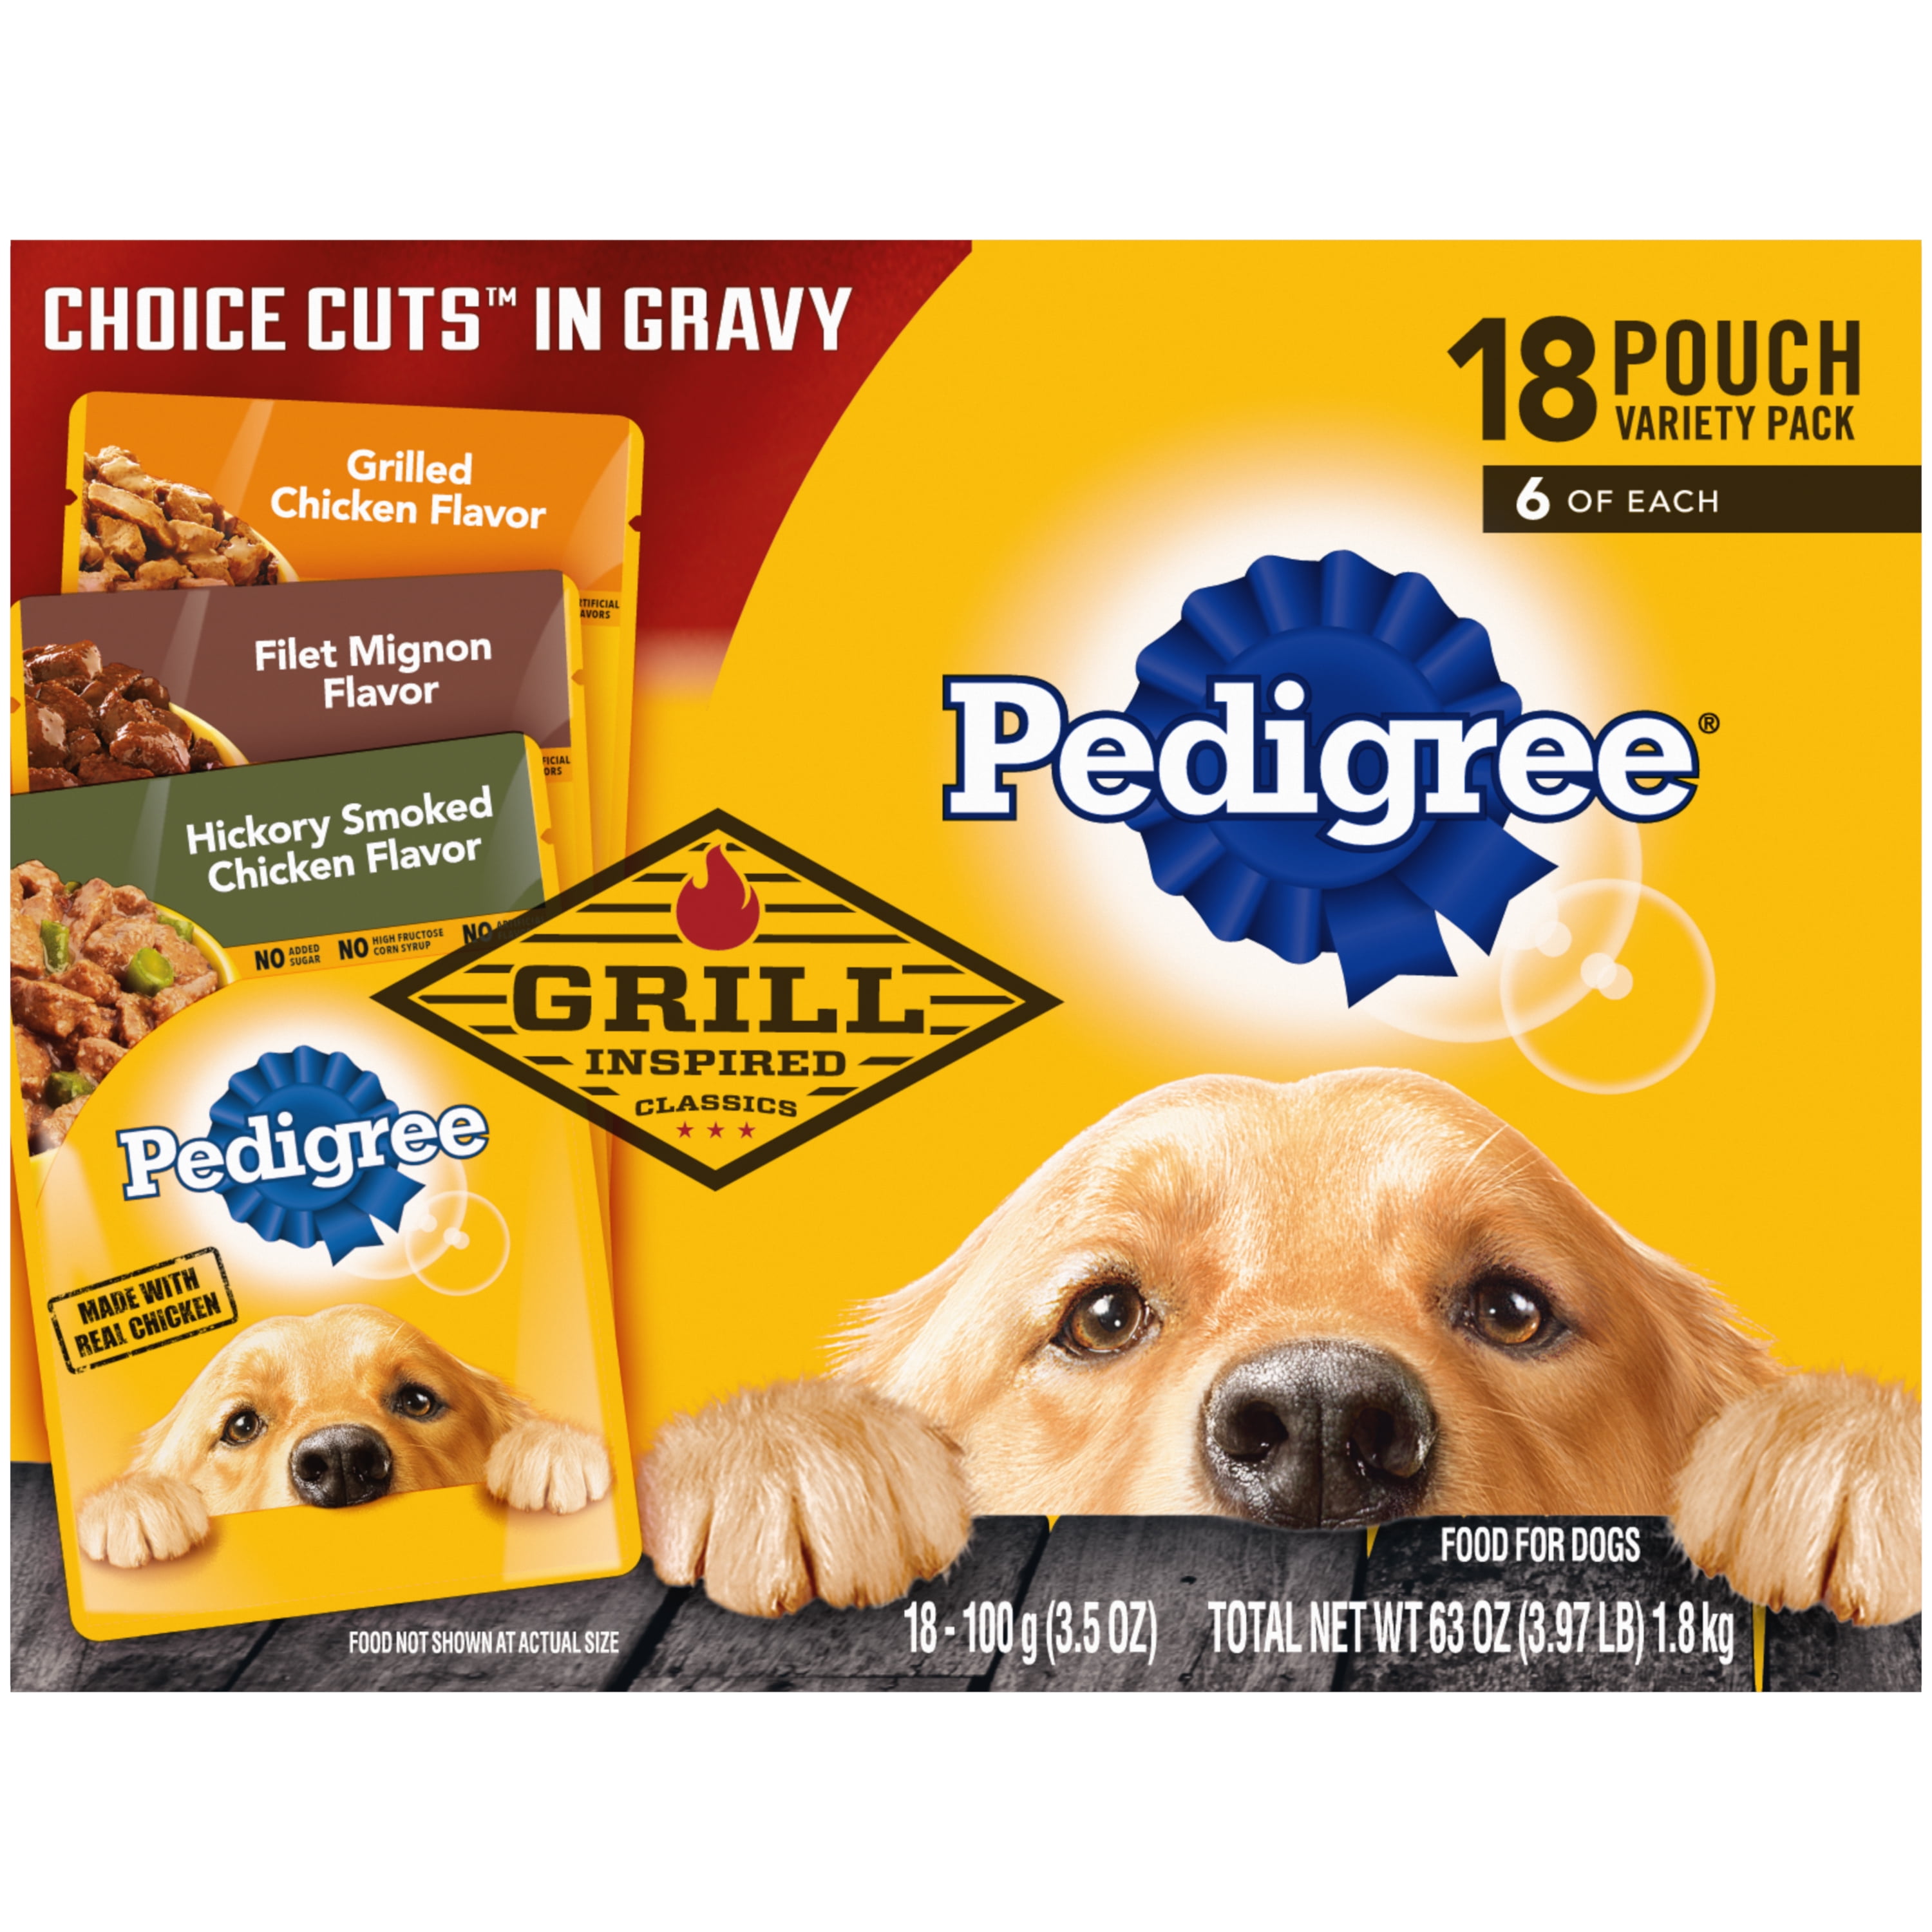 Pedigree Choice Cuts in Gravy Grill Inspired Classics Wet Dog Food Variety Pack, (18) 3.5 oz Pouches